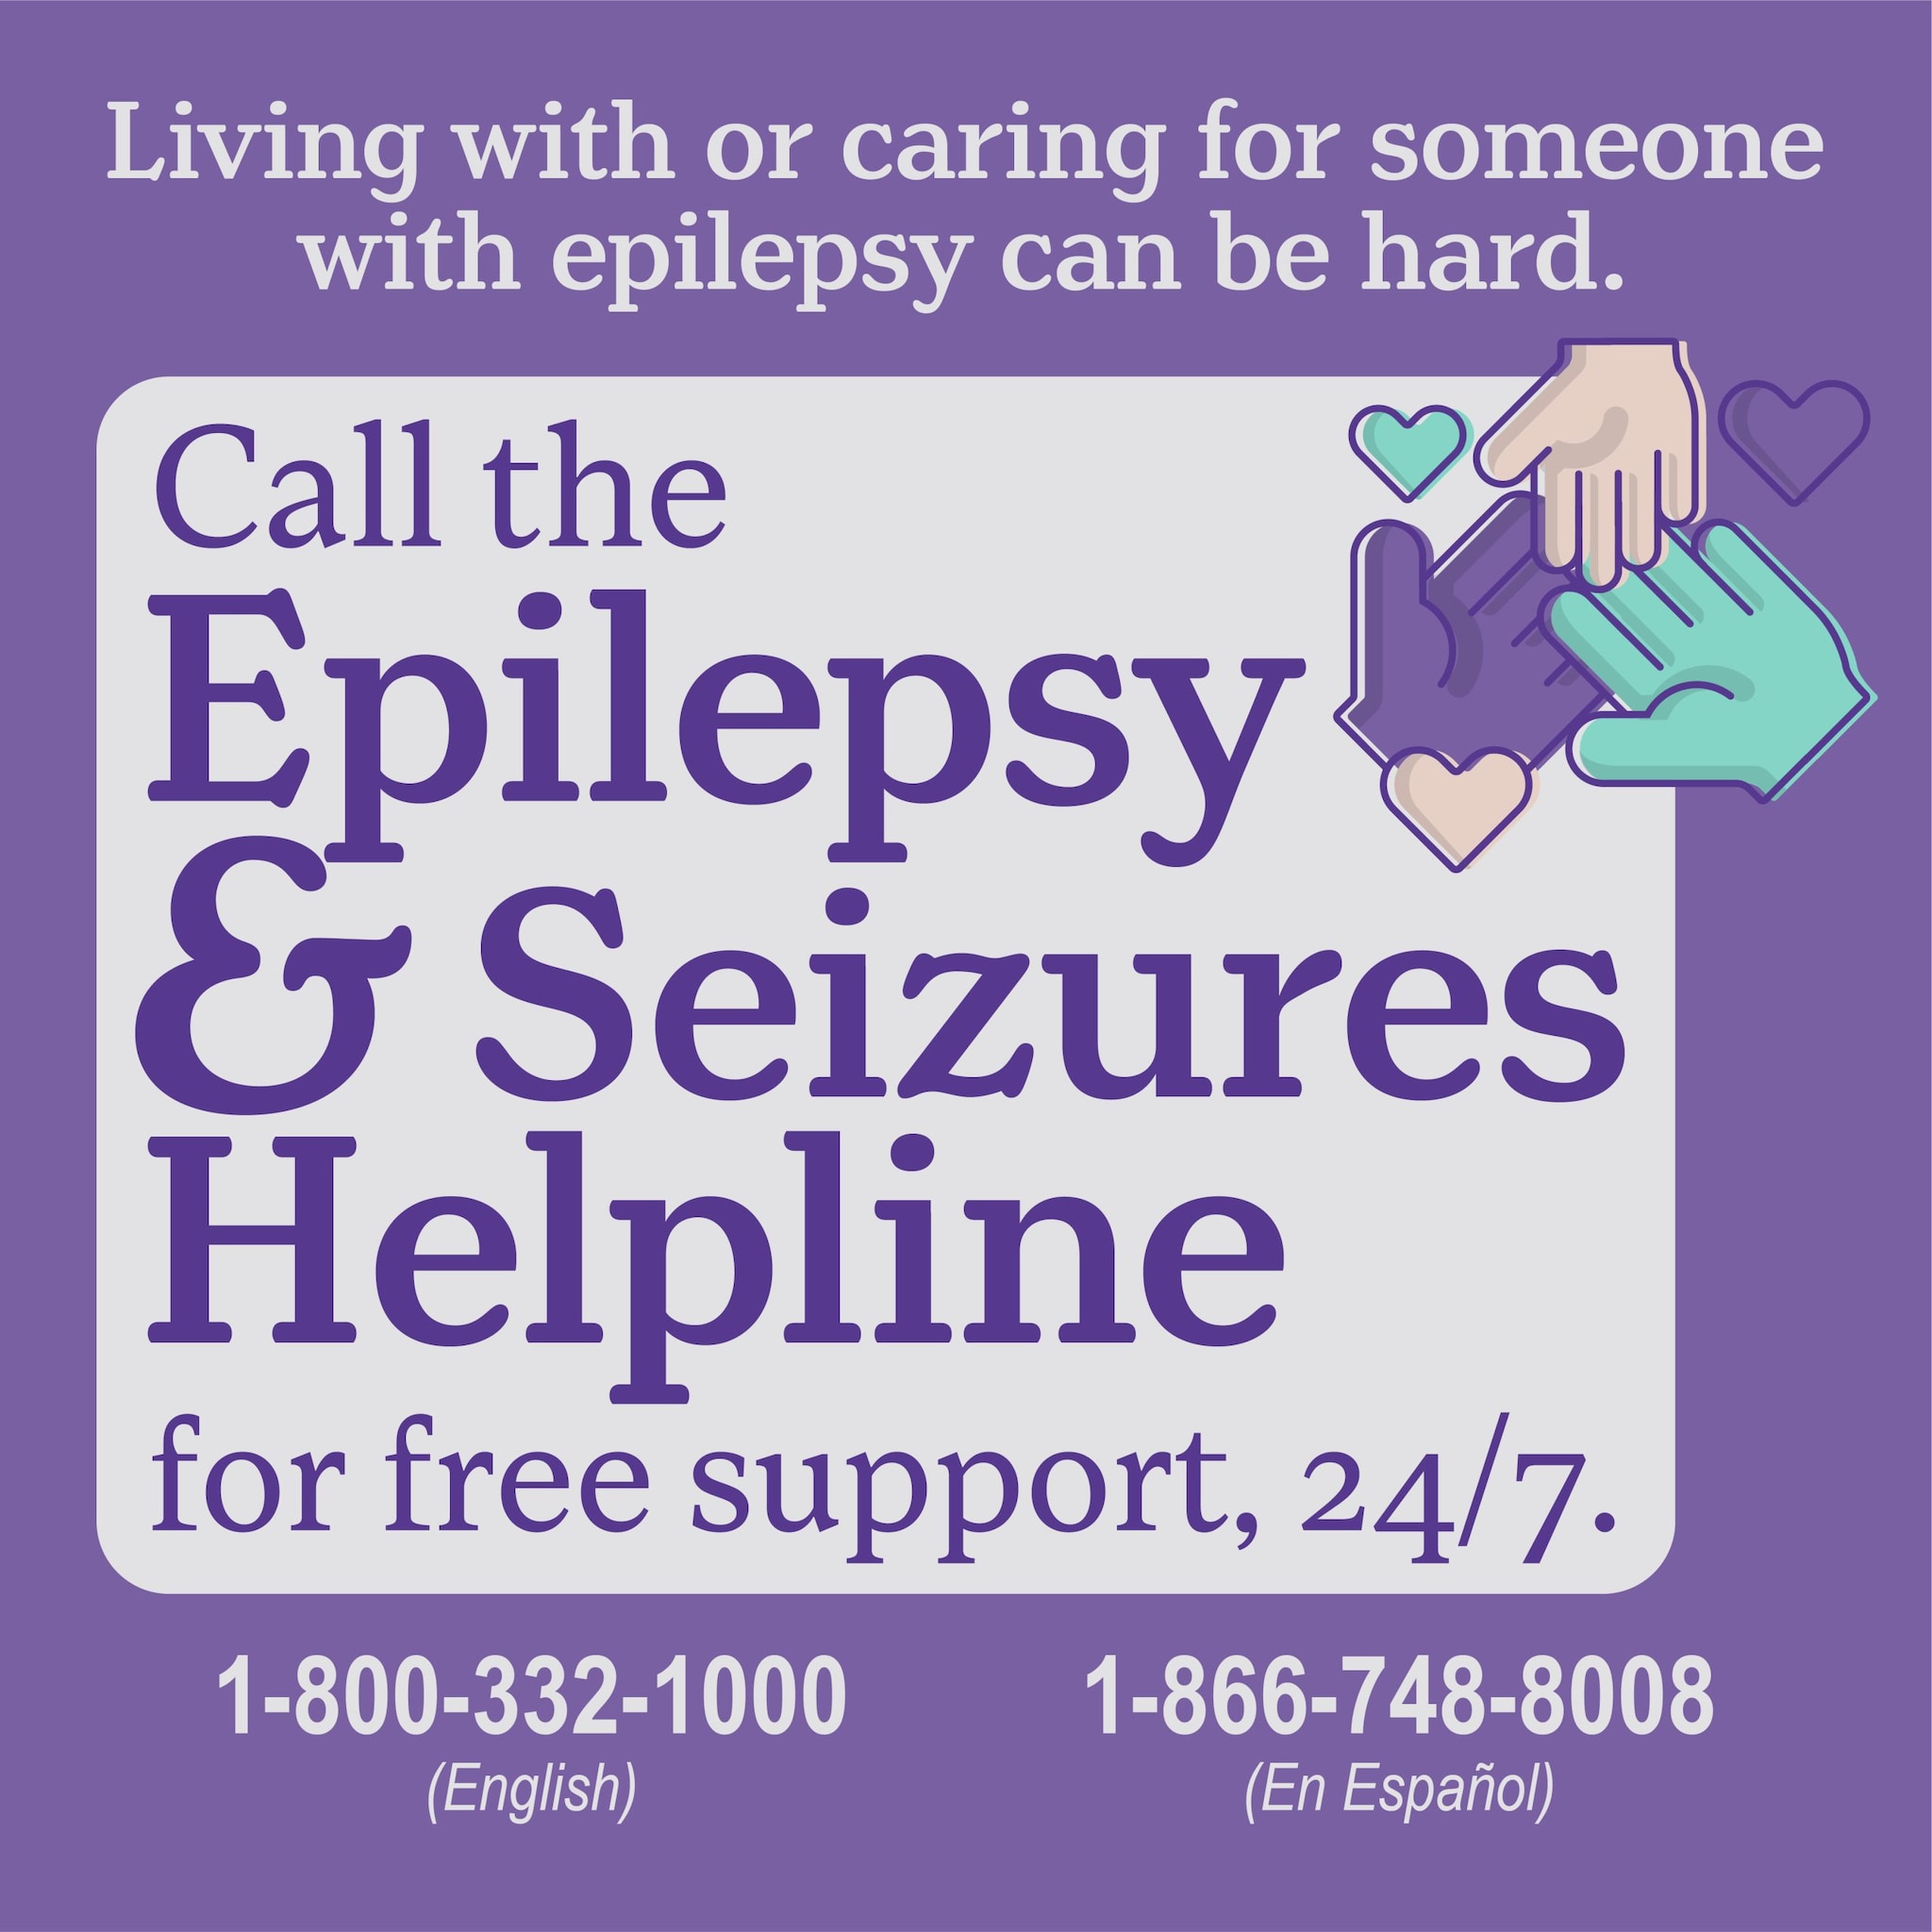 Living with or caring for someone with epilepsy can be hard. Call the Epilepsy & Seizures Helpline for free support, 24/7. 1-800-332-1000 (English) 1-866-748-8008 (En Espanol)